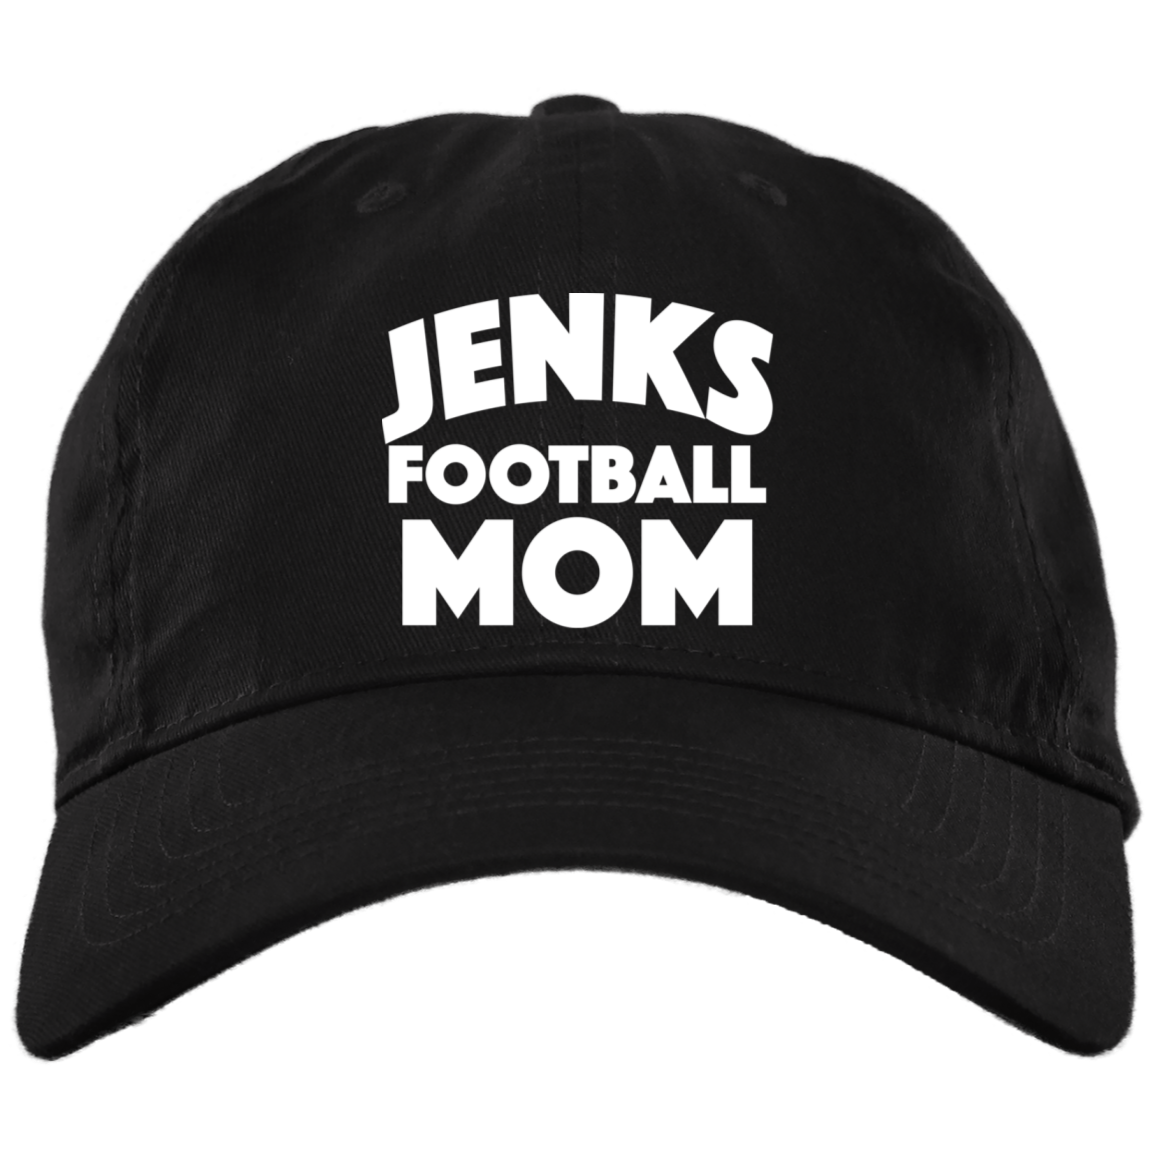 JENKS MOM Embroidered Brushed Twill Unstructured Dad Cap